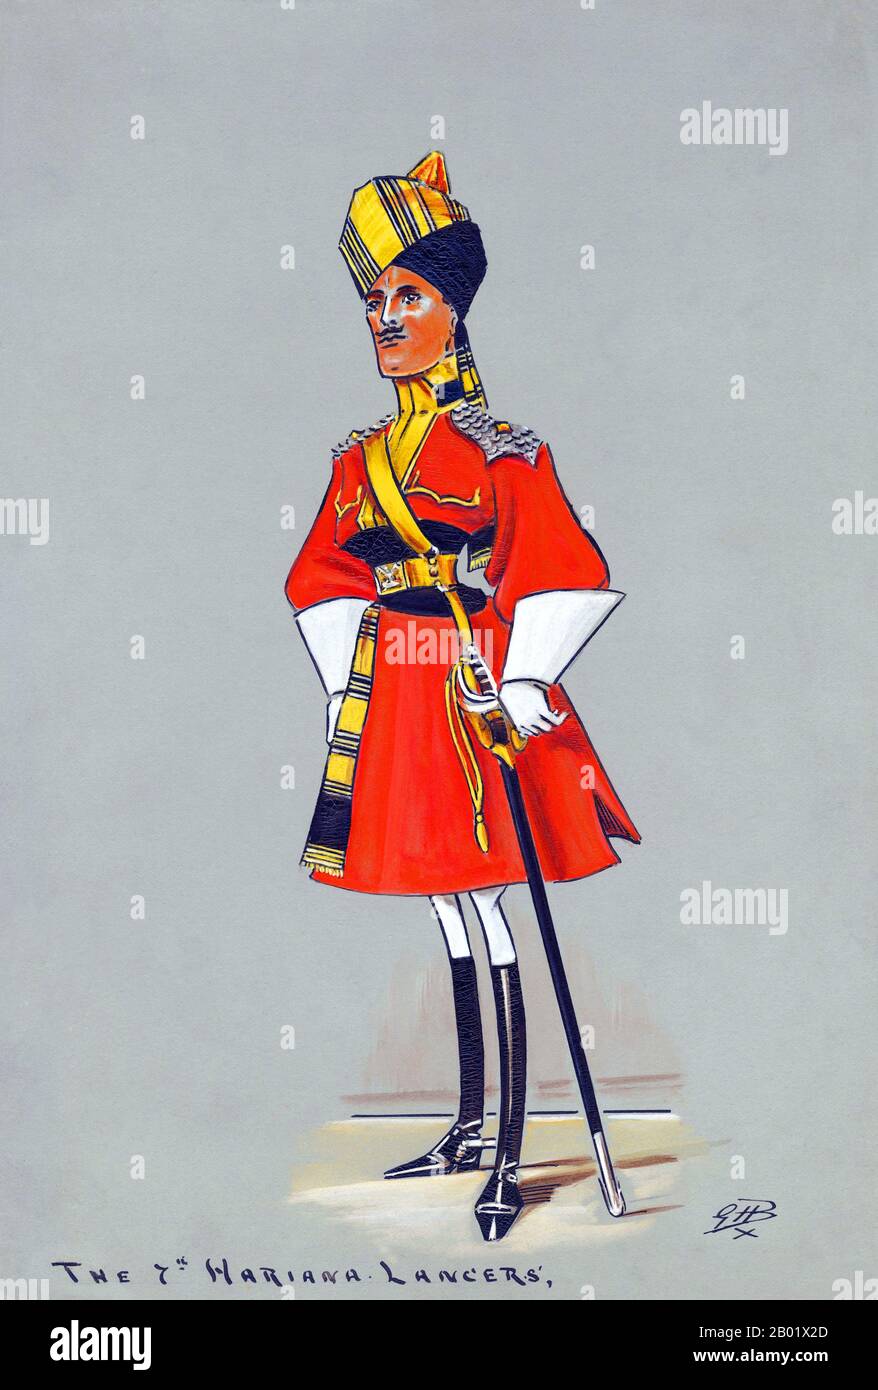 India: Officer of the 7th Hariana Lancers. Caricature style gouache painting by Godfrey Herbert Brennan (1875-1948), 1909.  The 7th Hariana Lancers was formed in 1846 as a regiment of Bengal Irregular Cavalry raised in Meerut and Cawnpore by Captain Liptrott. The Regiment was raised after the First Sikh War in anticipation of the Second War starting. When the Second Sikh War broke out, they did not become involved in any engagements but found themselves in the reserve force.  In 1857 when the Indian Rebellion broke out they were stationed on the North West Frontier and remained loyal. Stock Photo